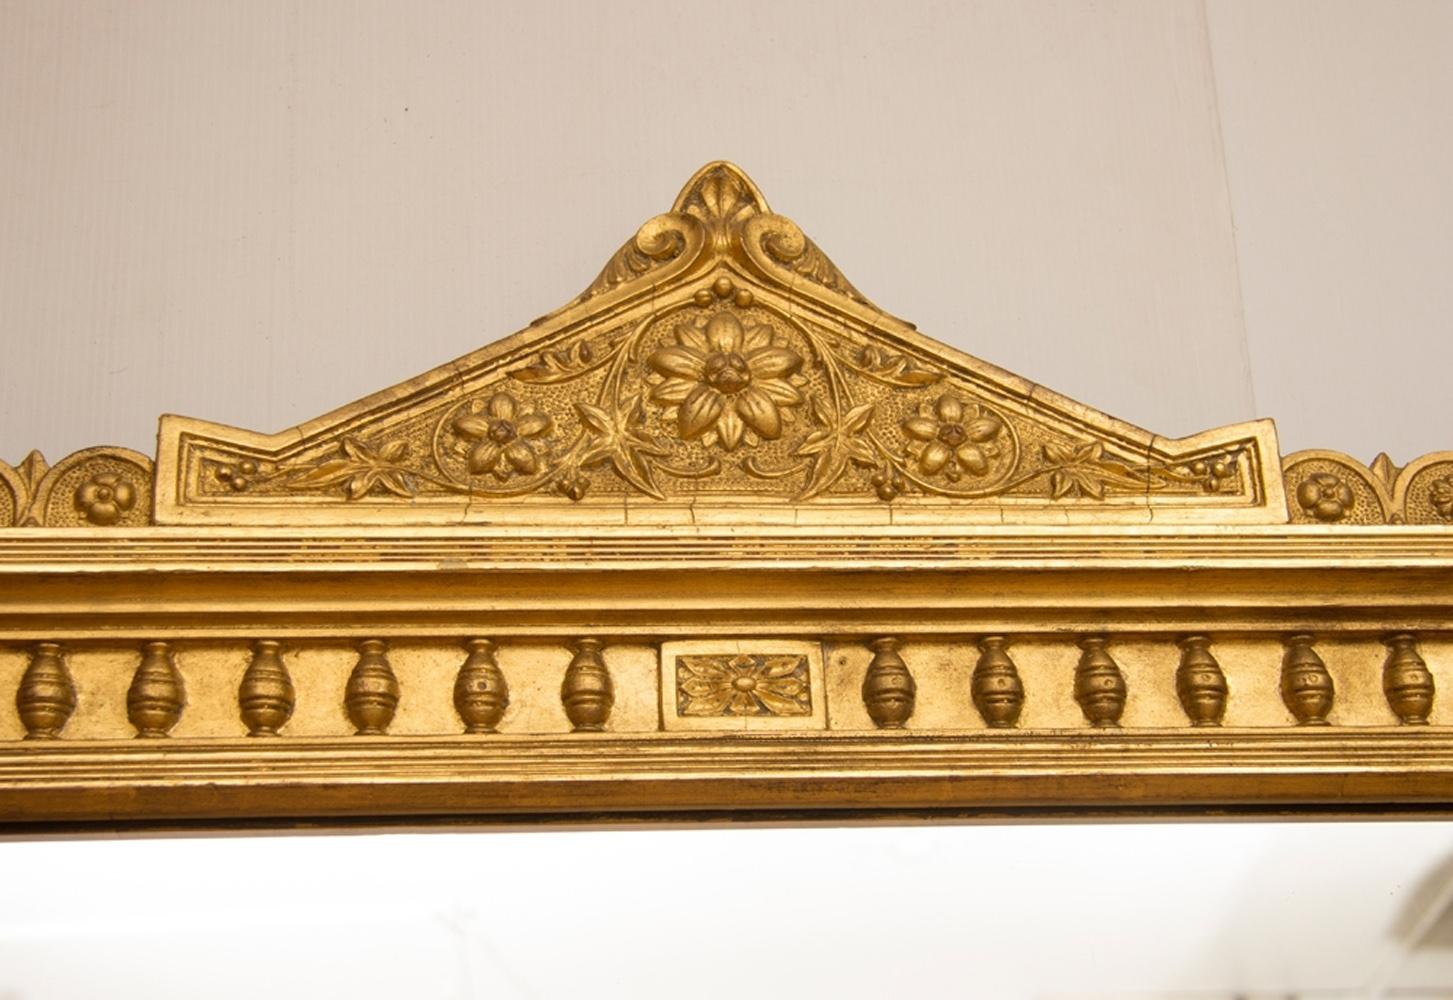 English antique gilded overmantel mirror with original glass mirror plate with one or two very small marks. No foxing. This is original silver nitrate mirror plate not mercury backed.
Structural restorations are carried out using traditional